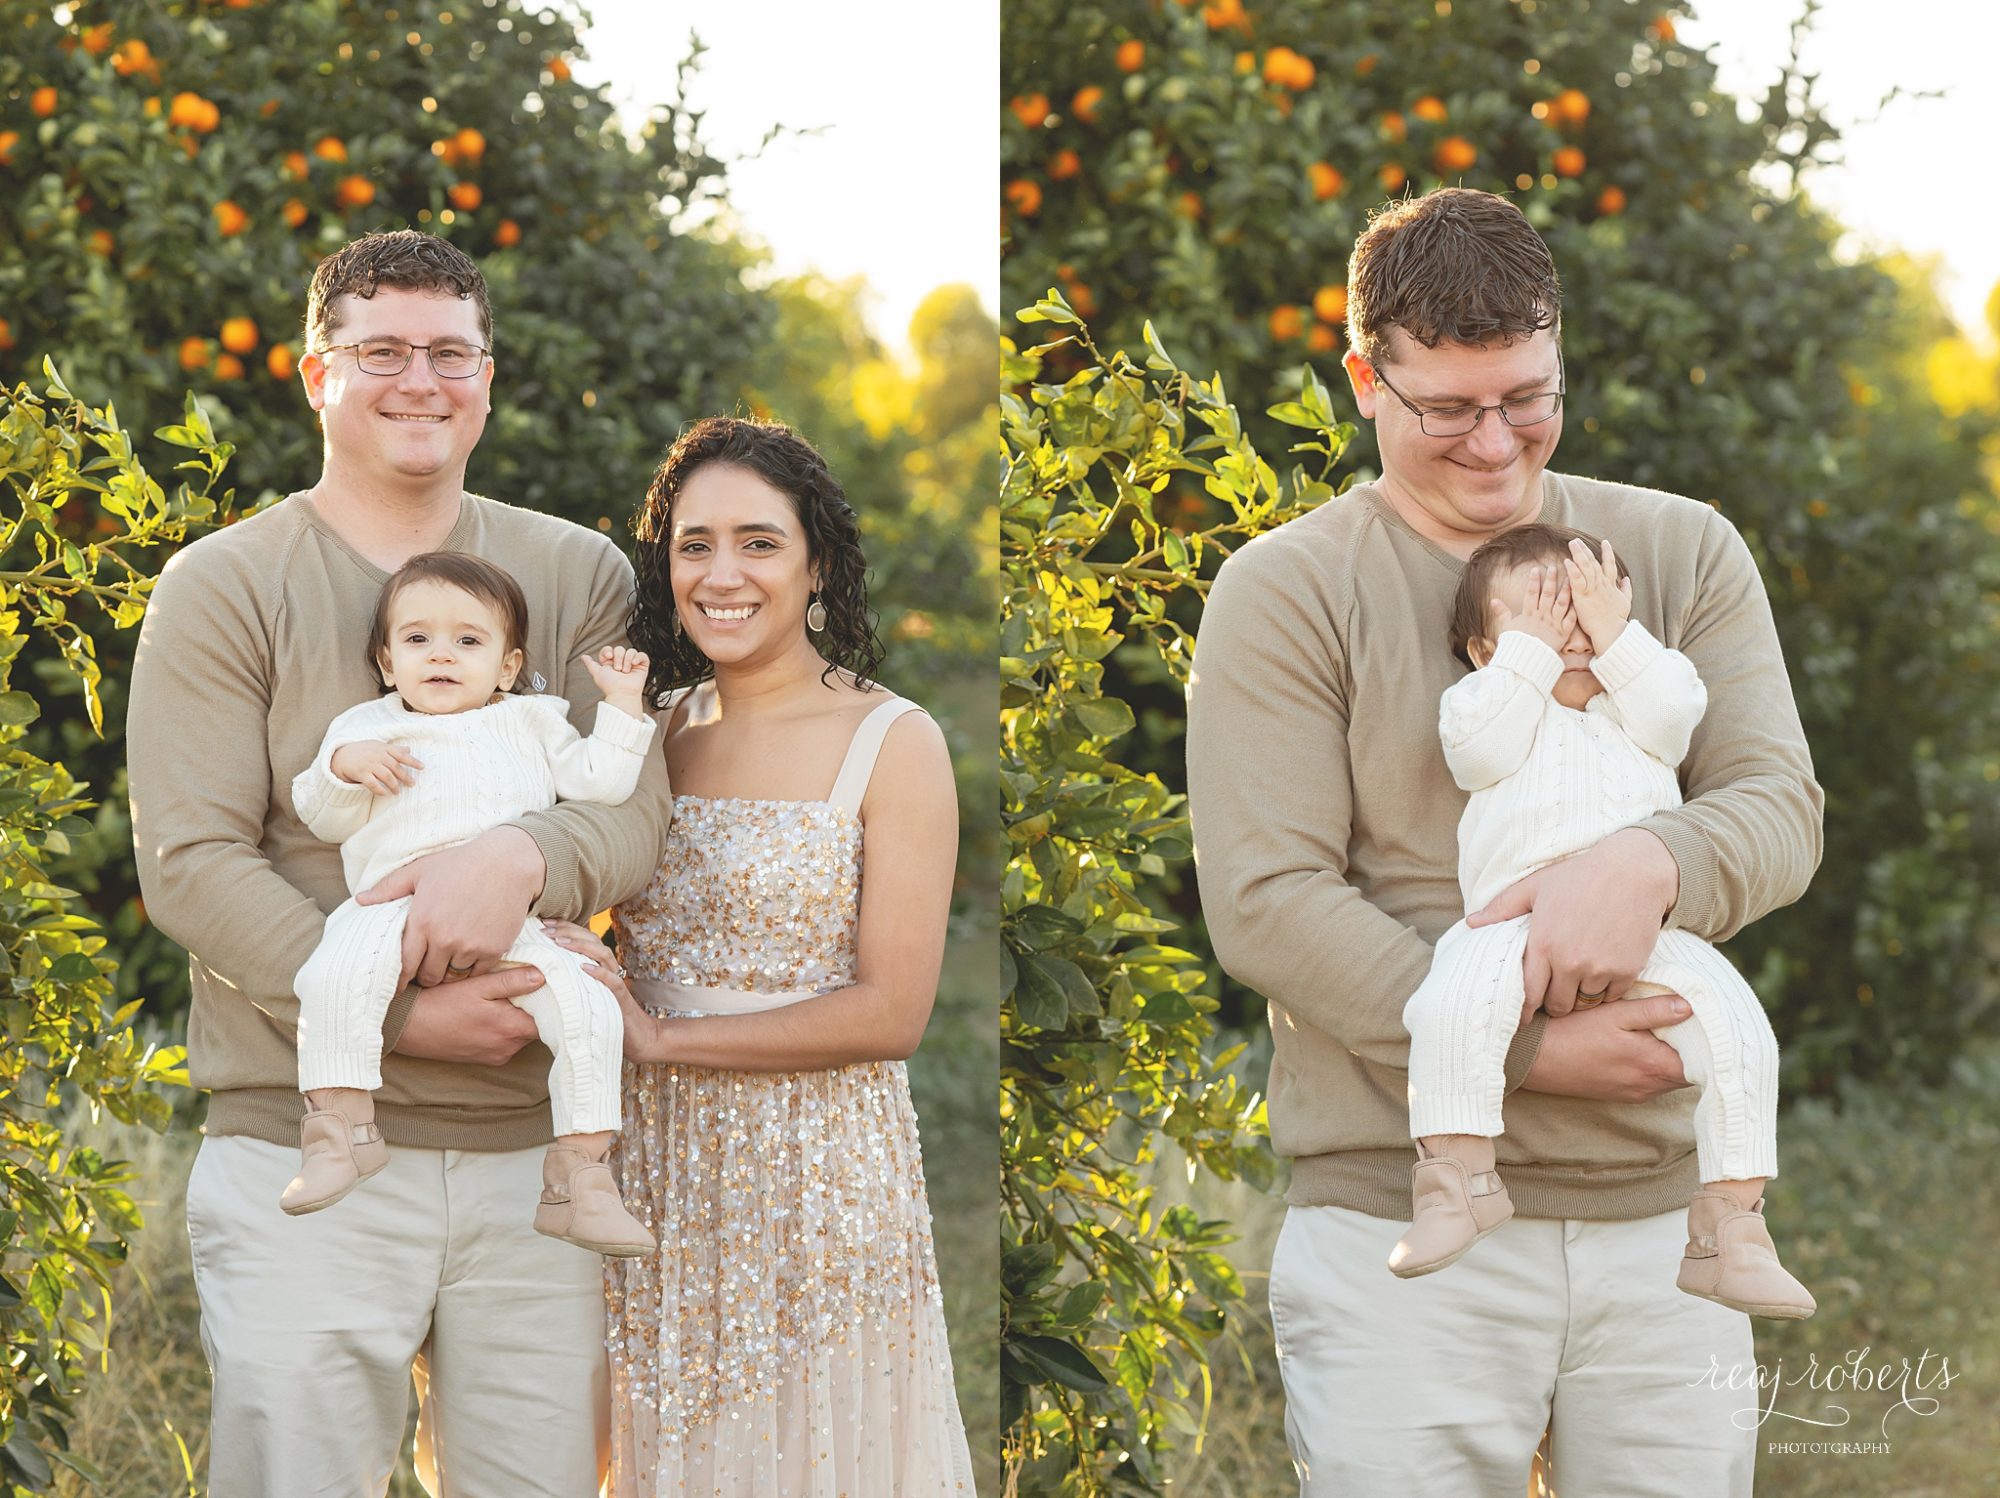 Family Poses in Citrus Grove during sunset | Phoenix Family Photographer | Reaj Roberts Photography